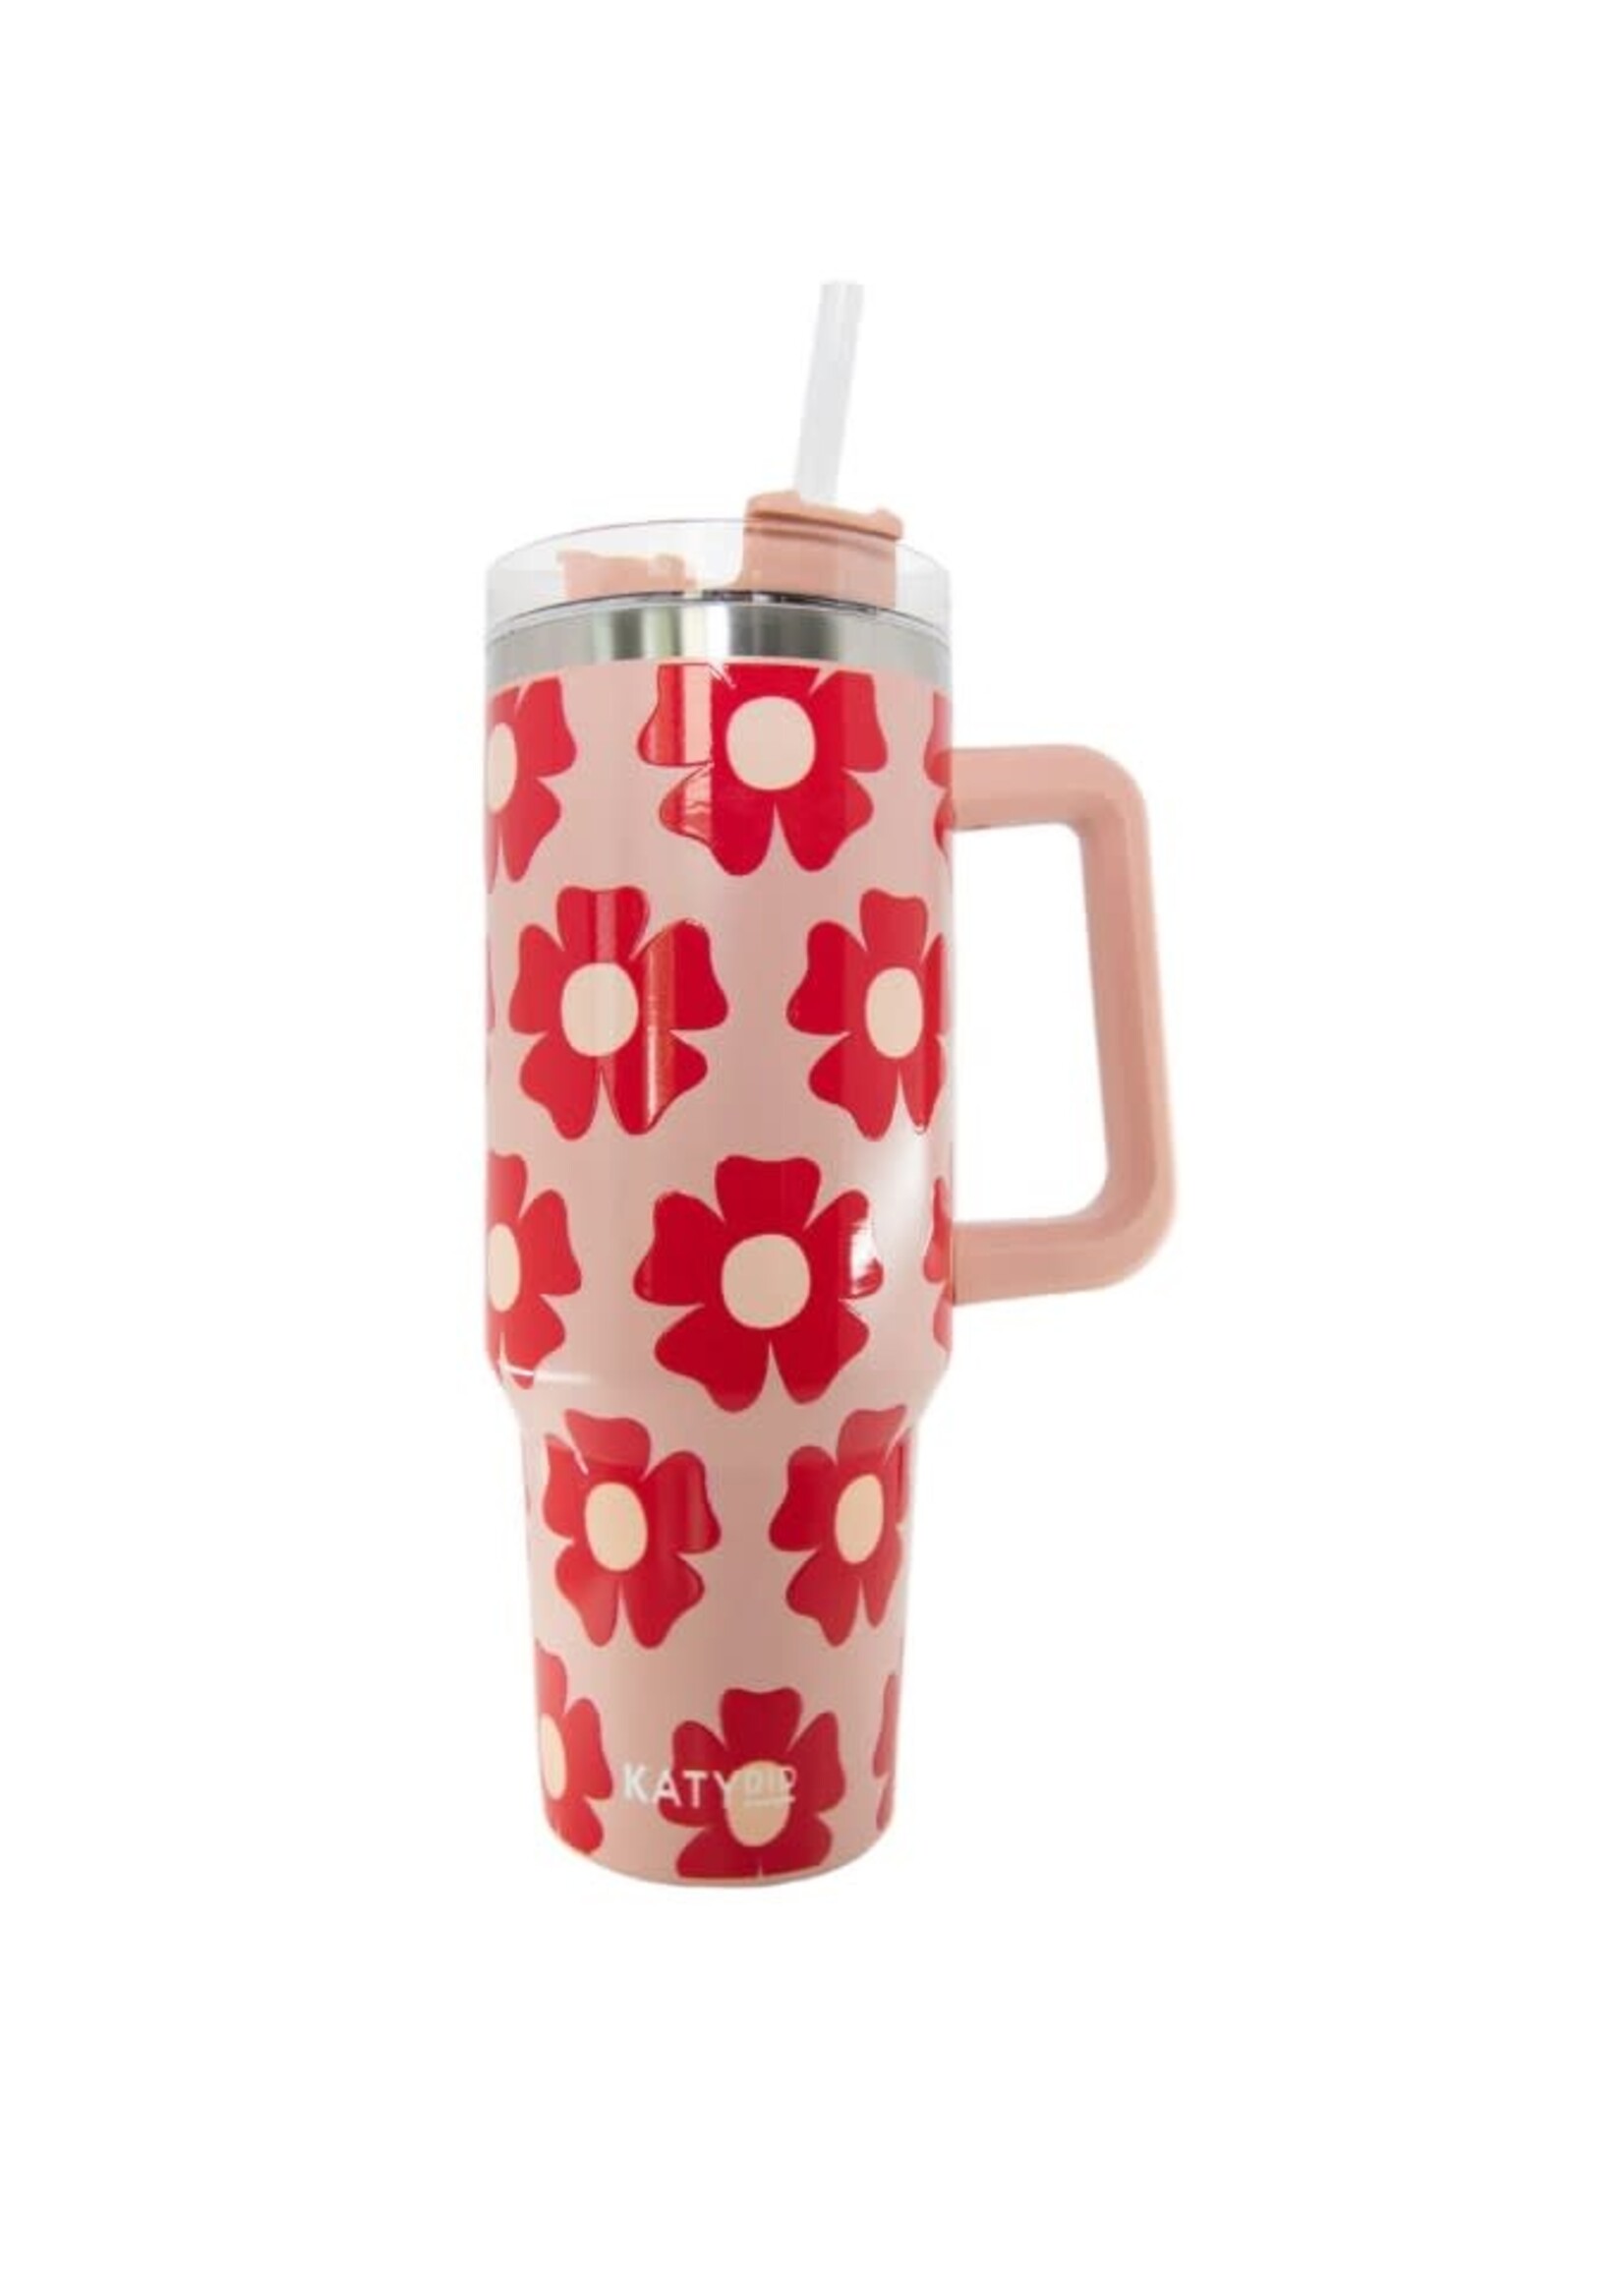 Katydid Hot Pink Tumbler Cup with Handle – The Market Boutique